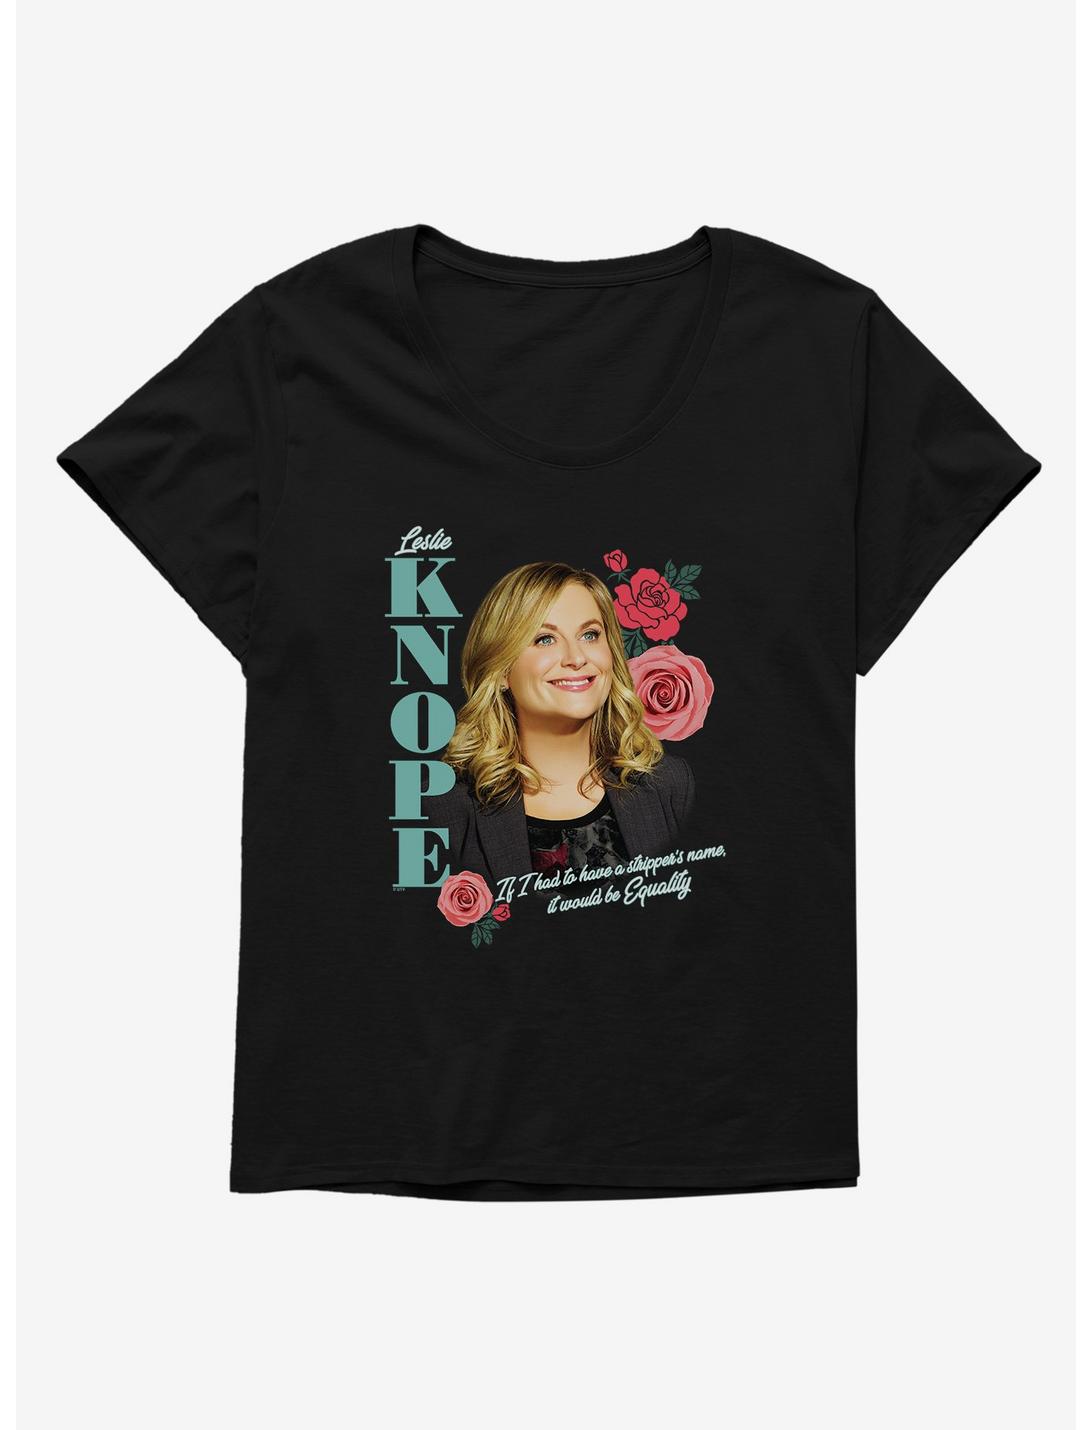 Parks And Recreation Knope Womens T-Shirt Plus Size, , hi-res